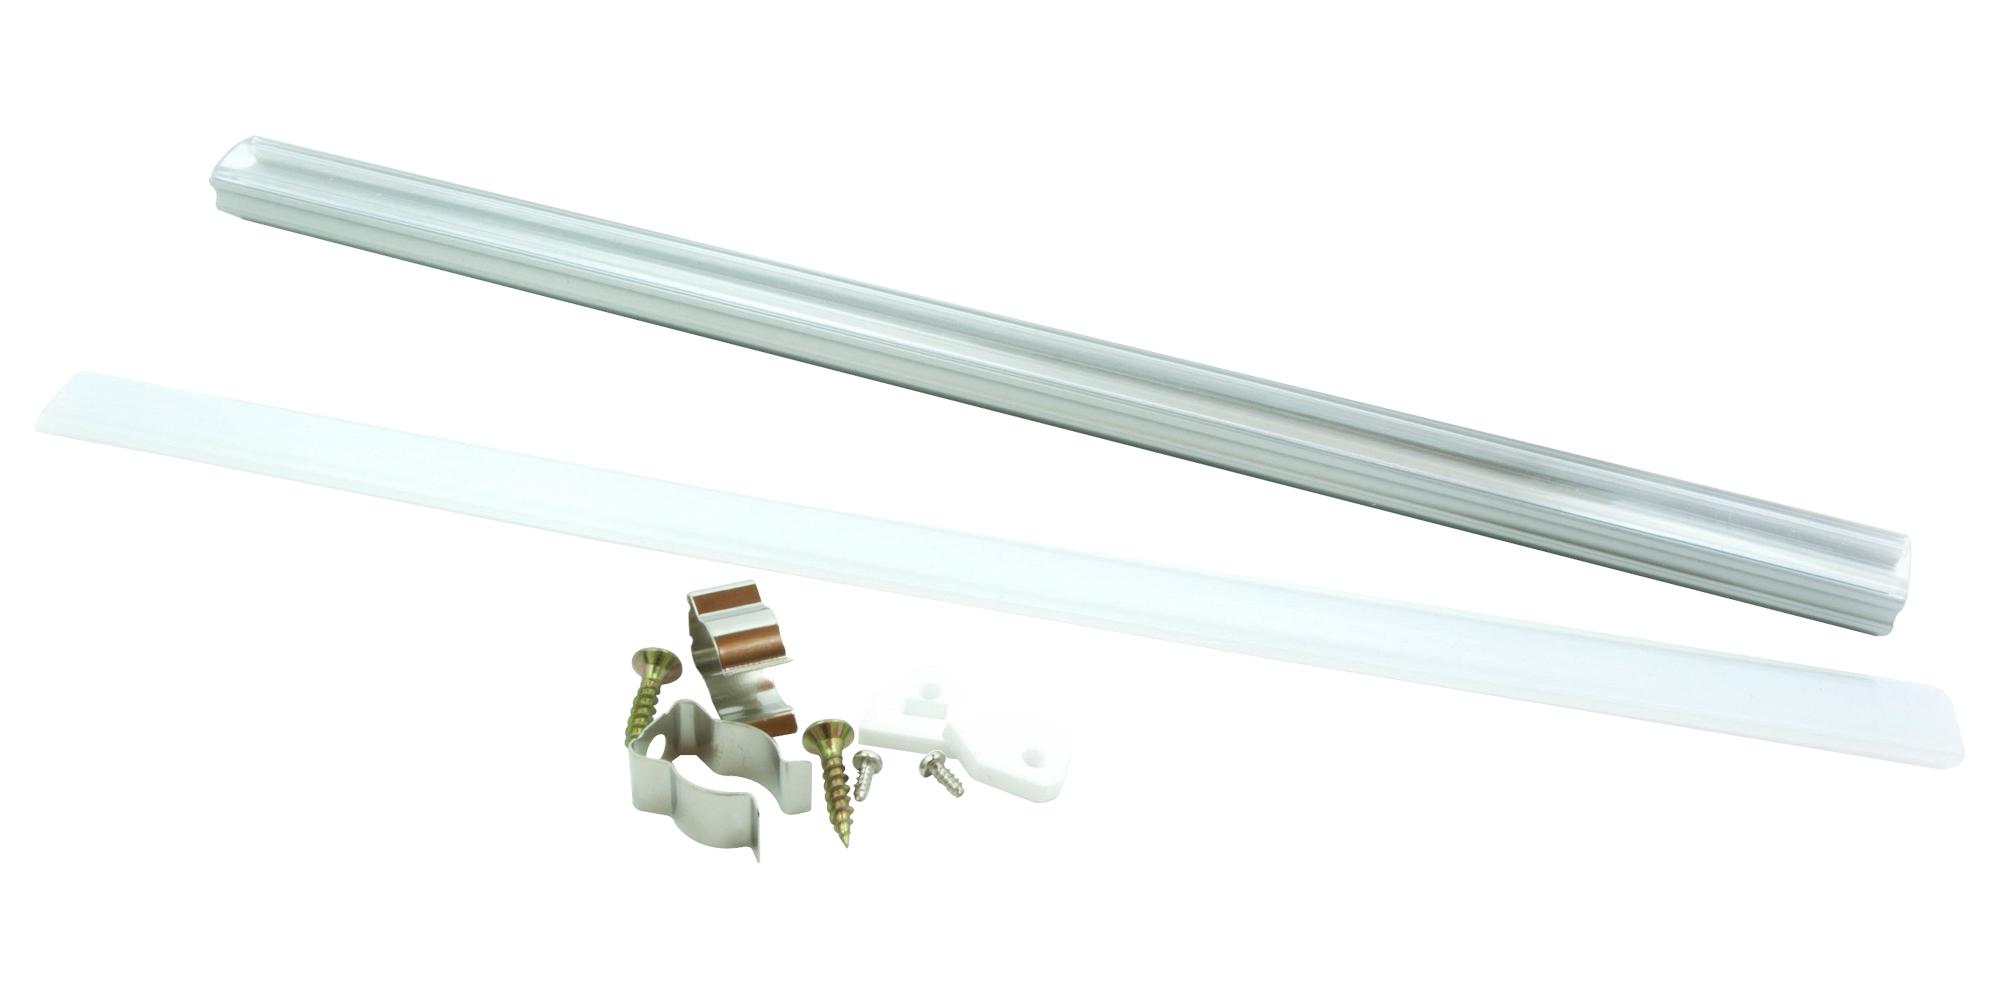 Intelligent Led Solutions Ilk-Flexext-1500-002. Kit, Led Strip, Angled Extrusion, 1.5M